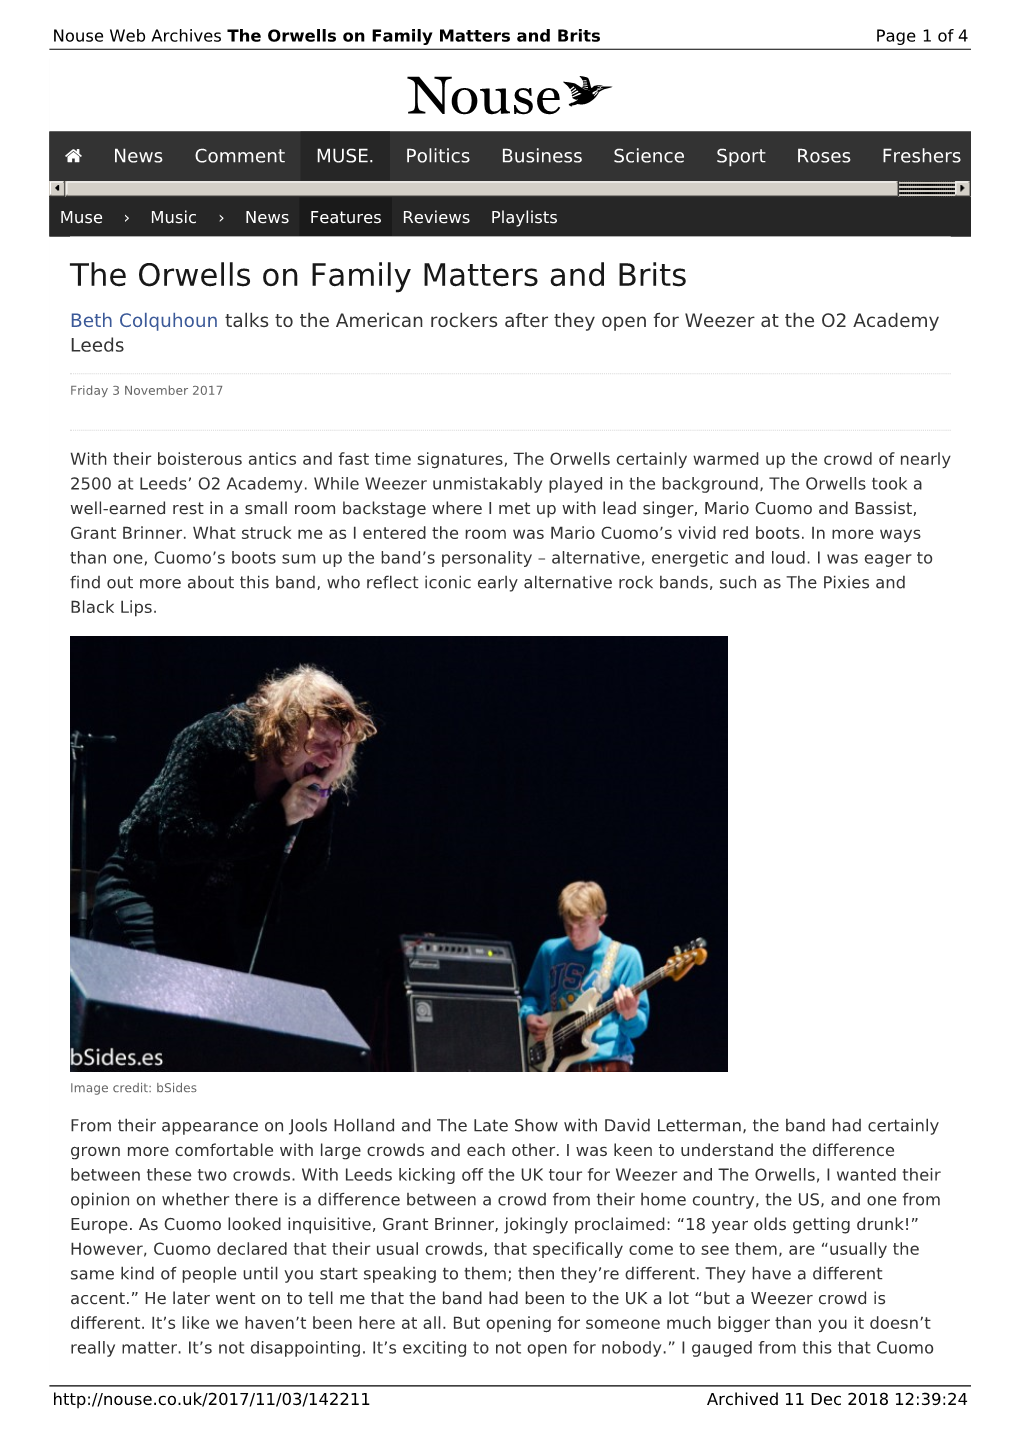 The Orwells on Family Matters and Brits | Nouse